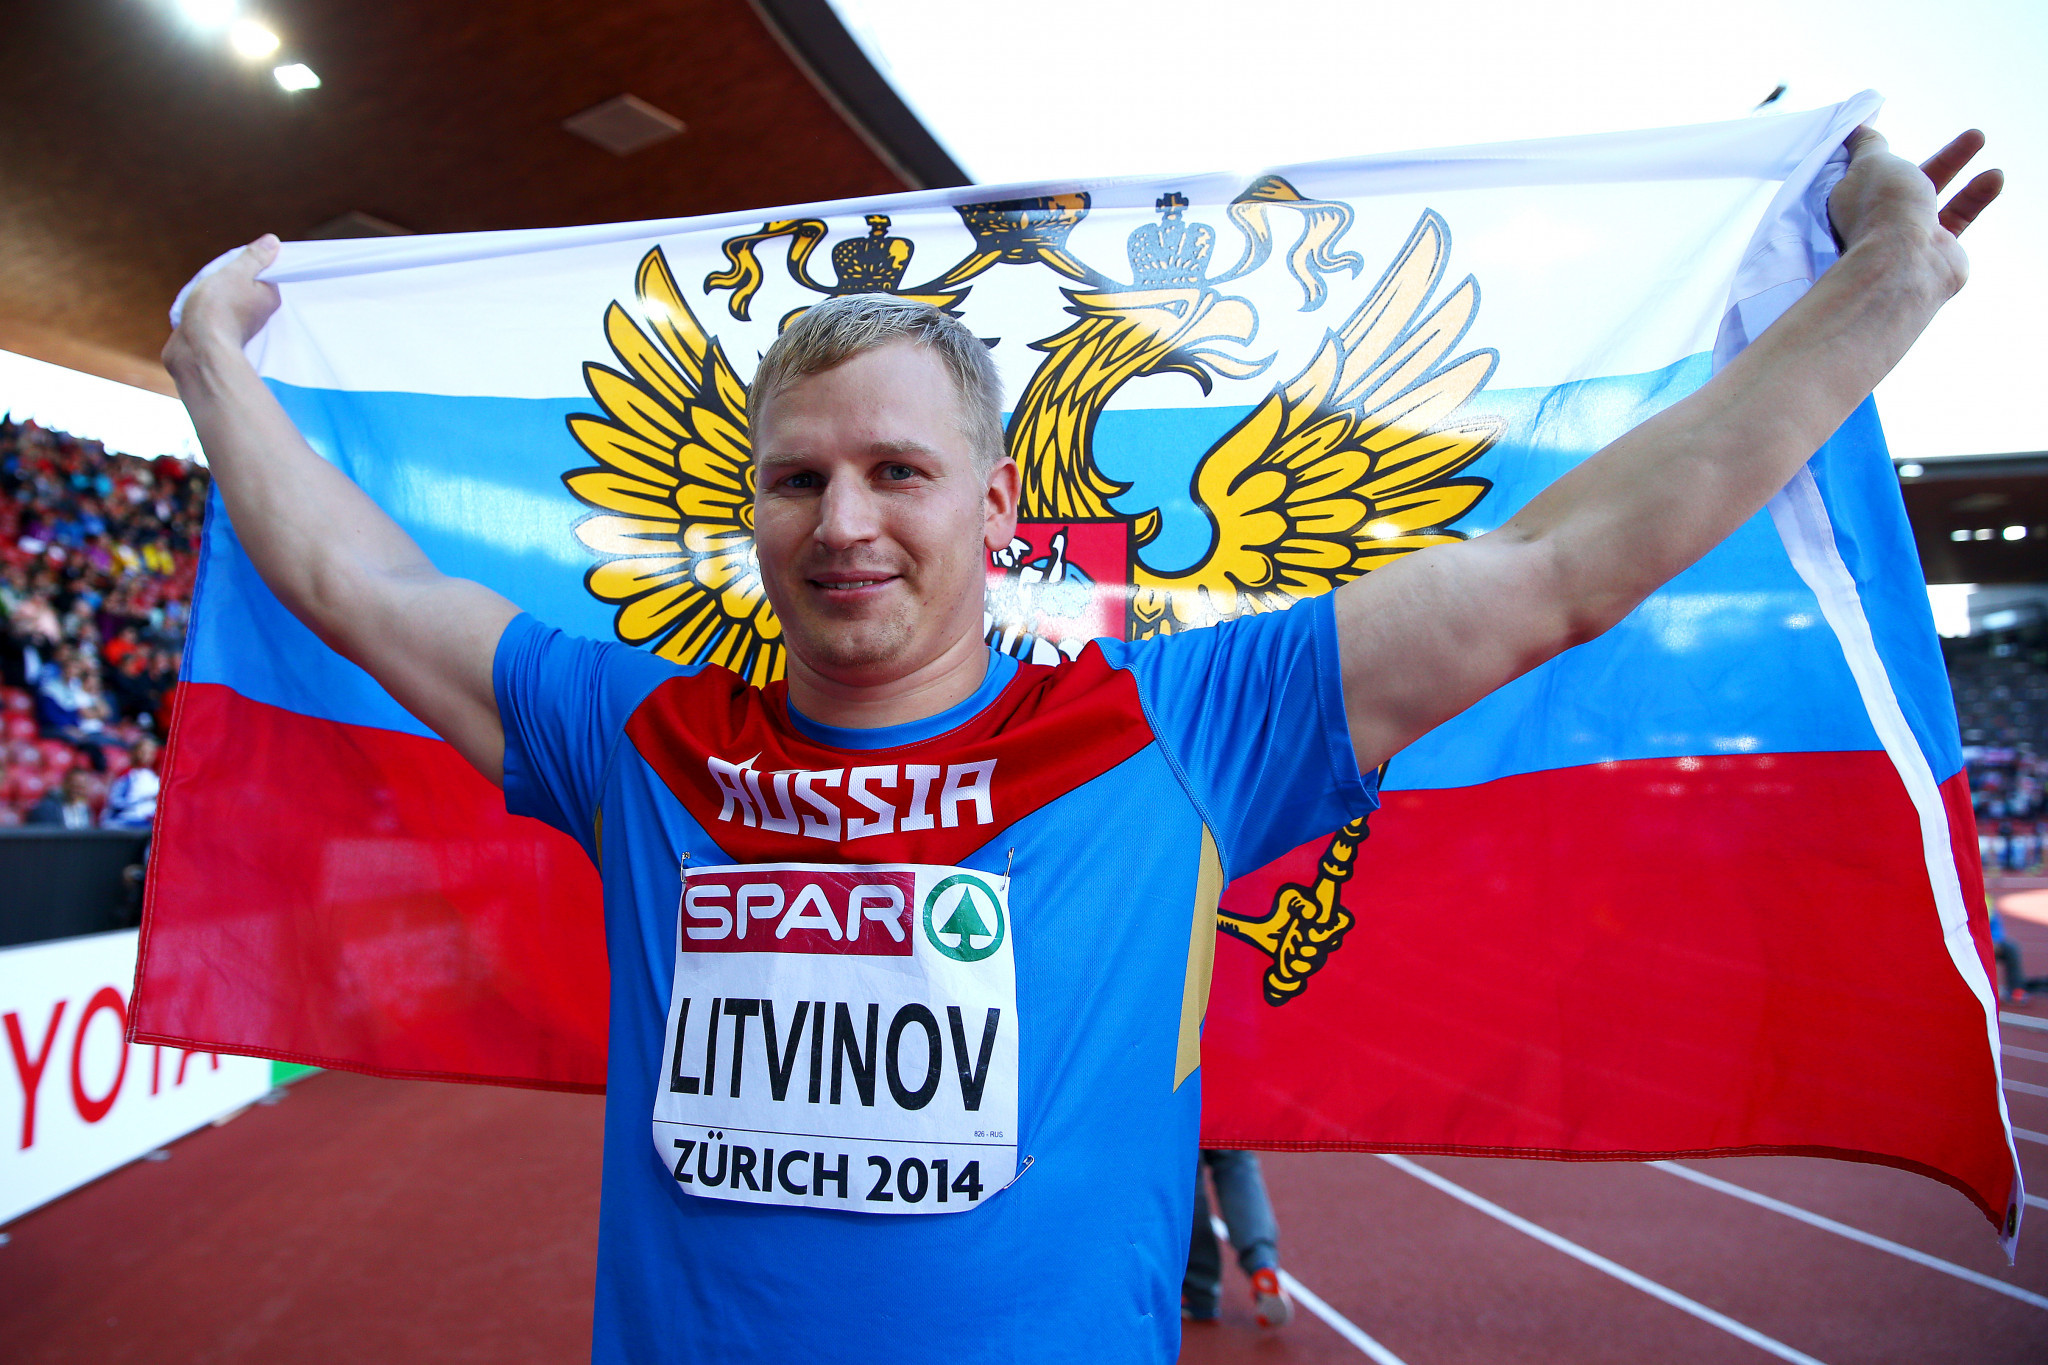 Russian hammer thrower Sergey Litvinov has confessed to doping in an attempt to qualify for the 2012 Olympics in London ©Getty Images